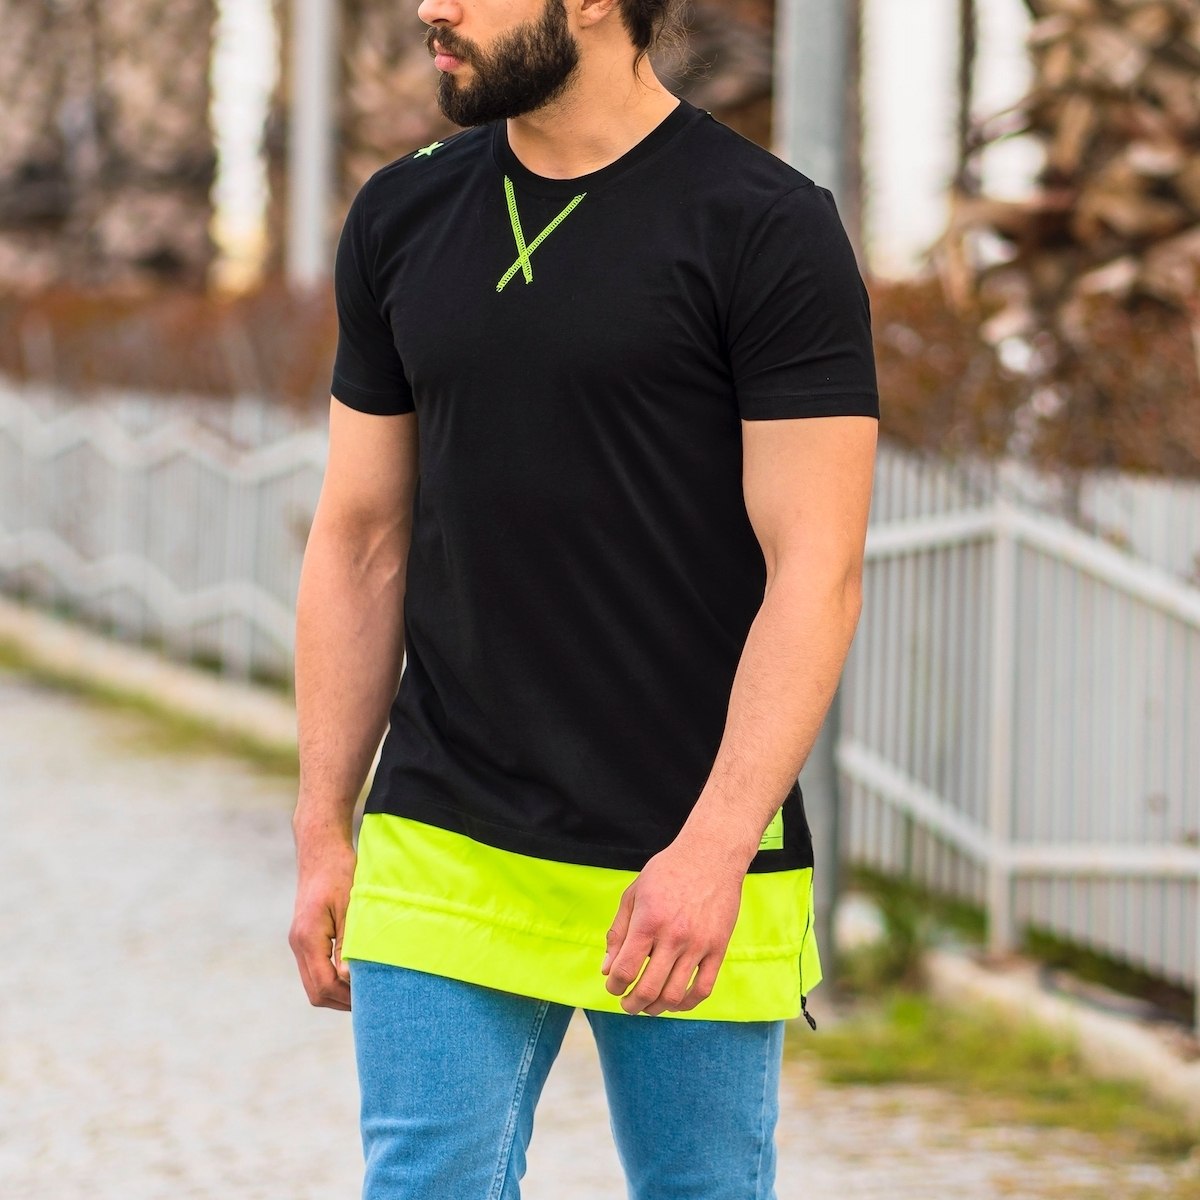 Men's Double-Tailed Neon Oversize T-Shirt In Black - 3